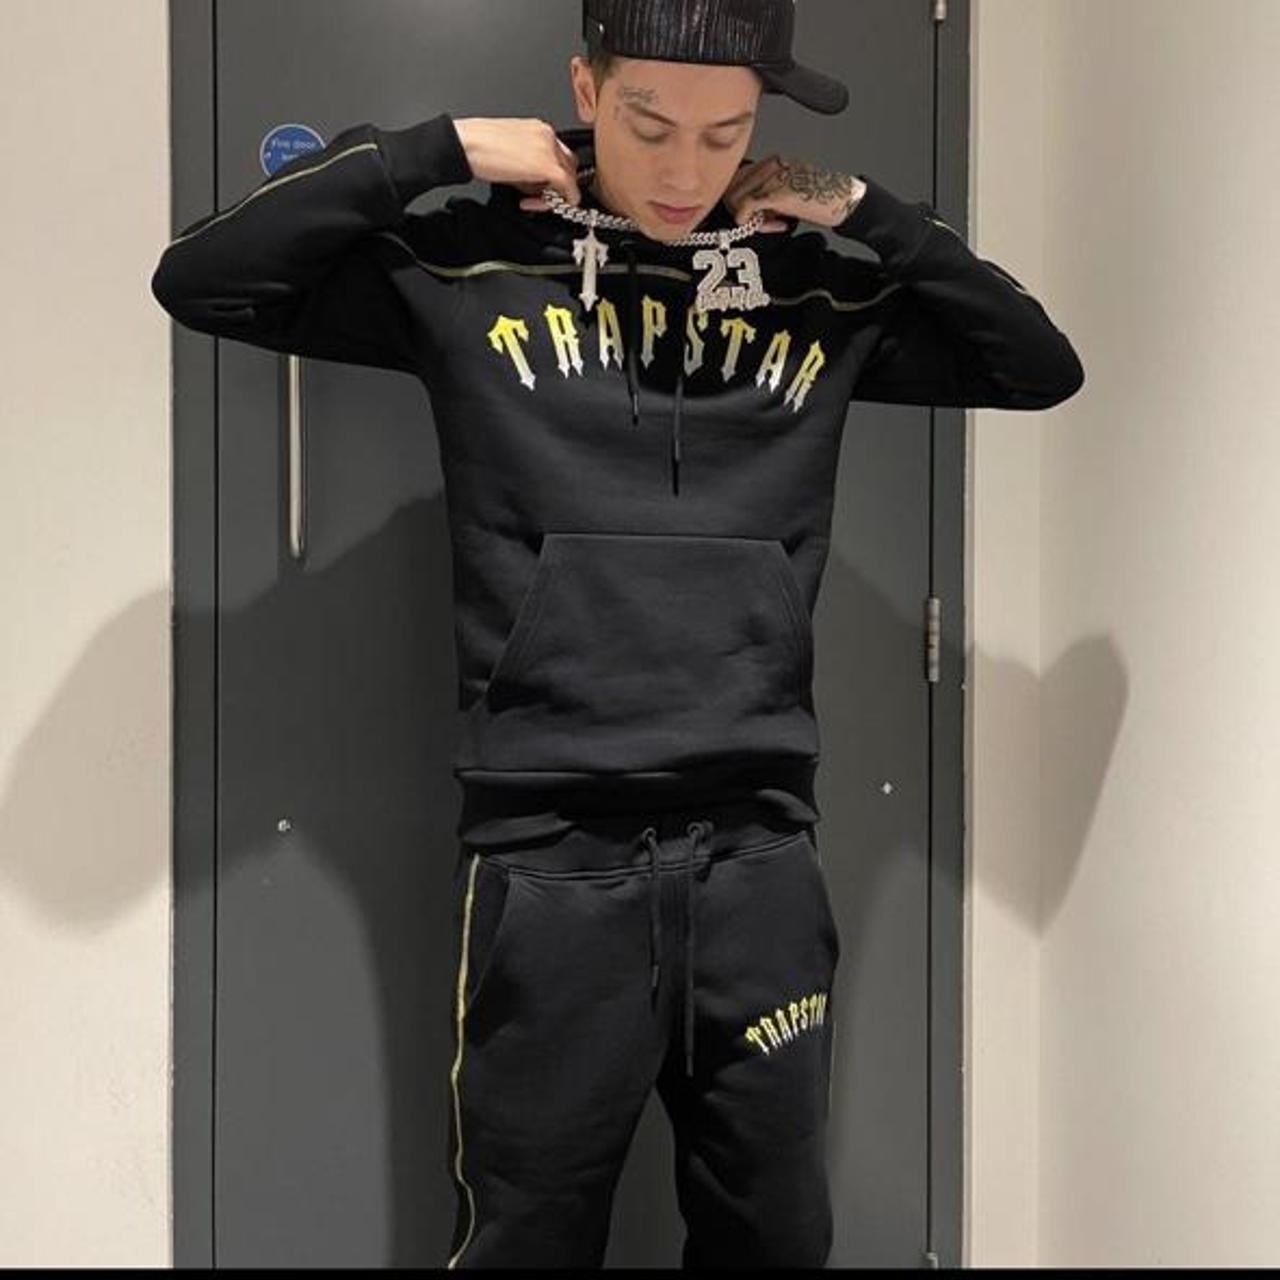 Central cee着用 trapstar tracksuits セットアップ - セットアップ